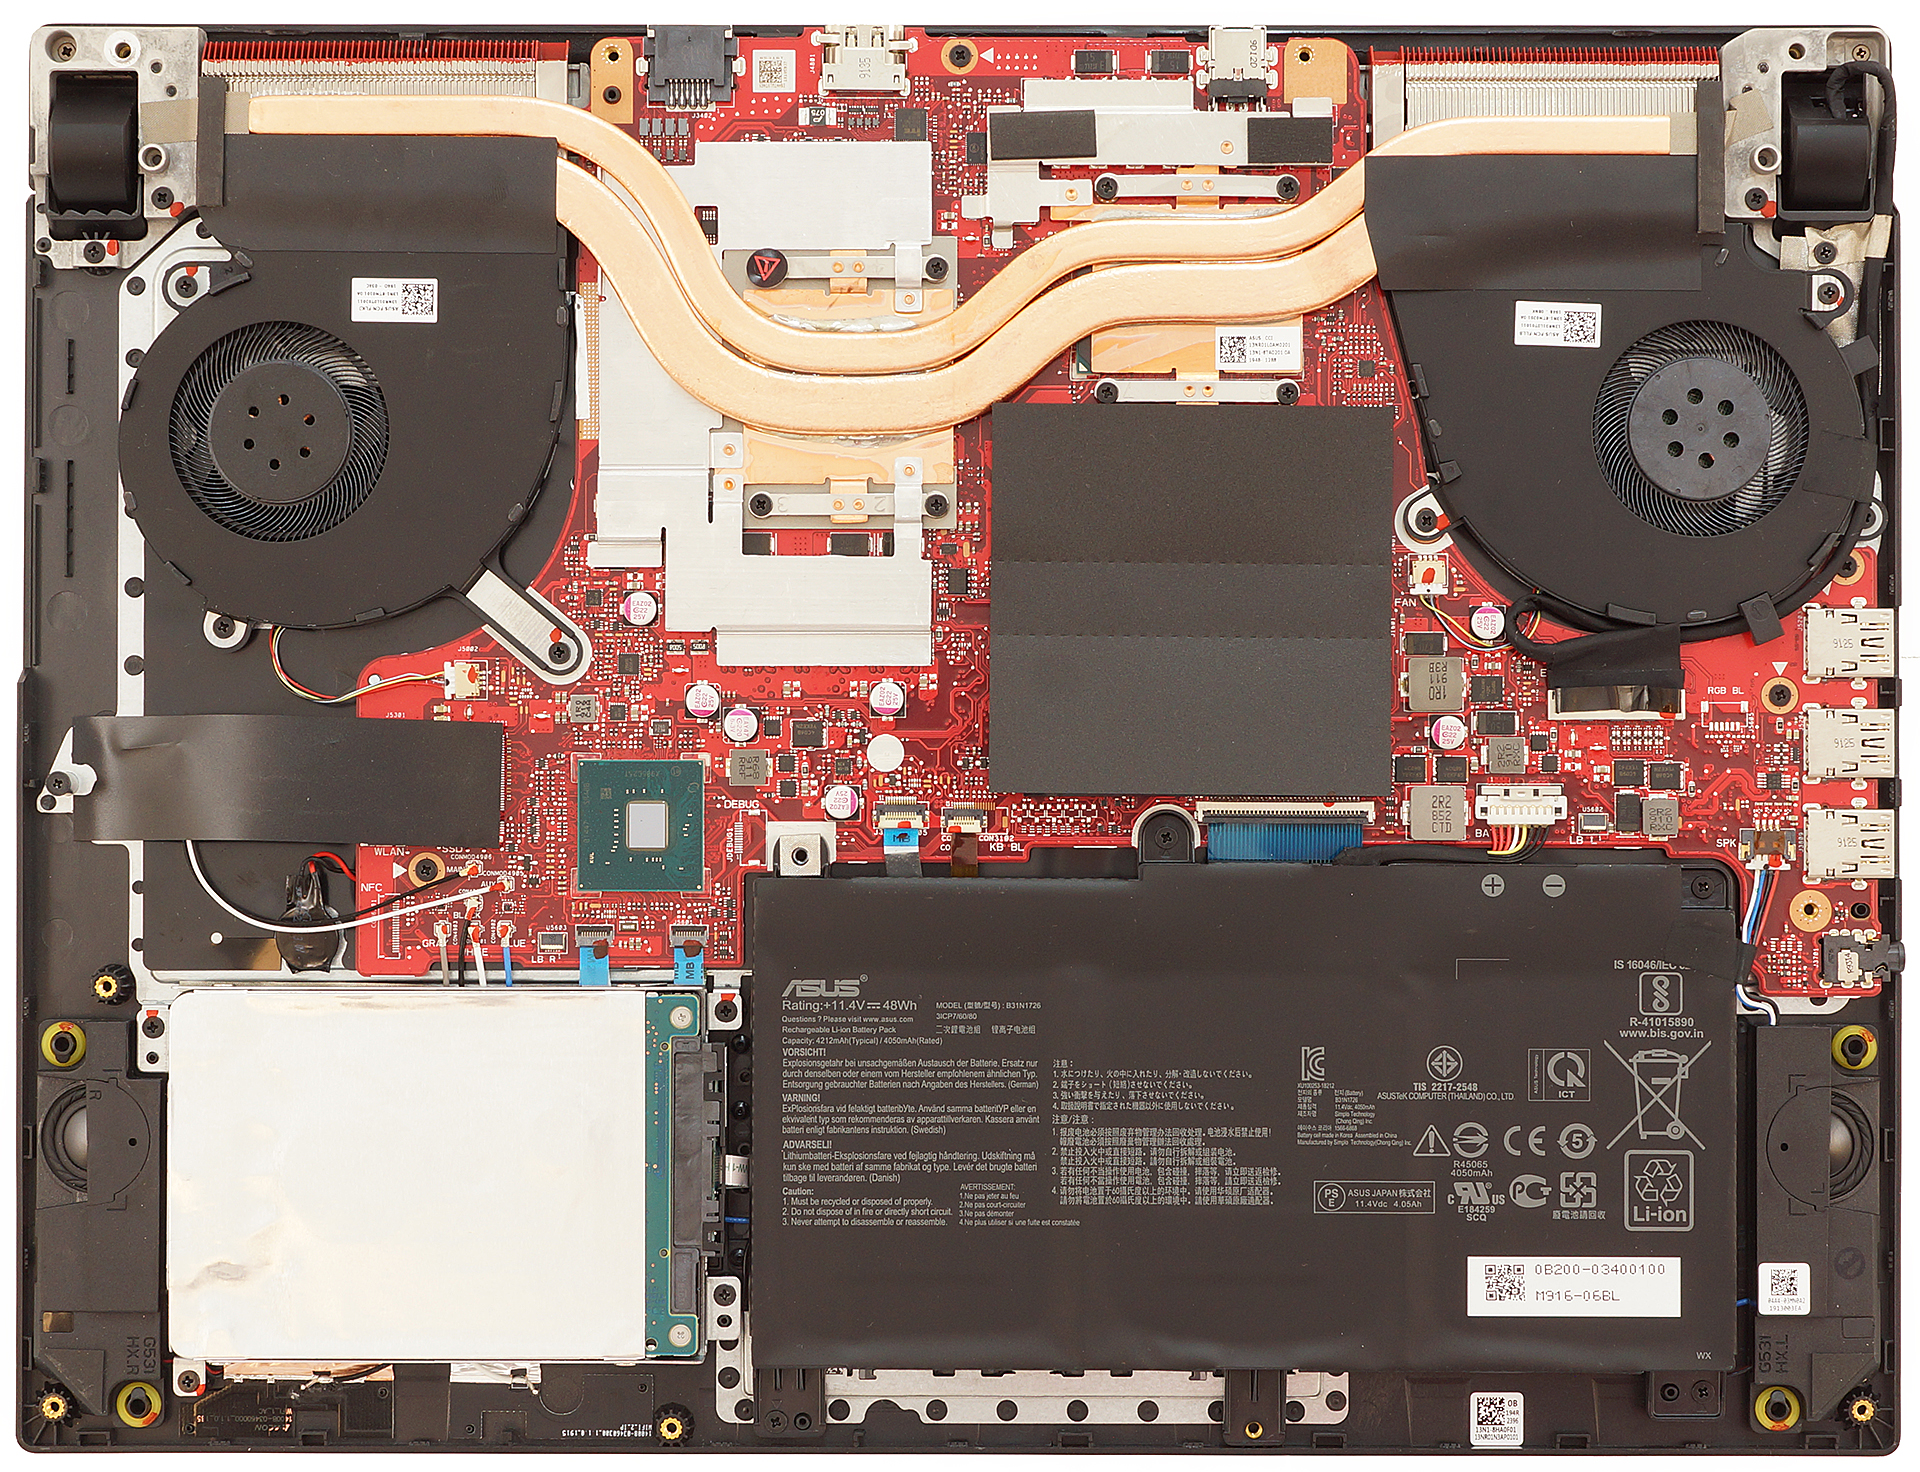 Inside ASUS ROG Strix G531 disassembly and upgrade options